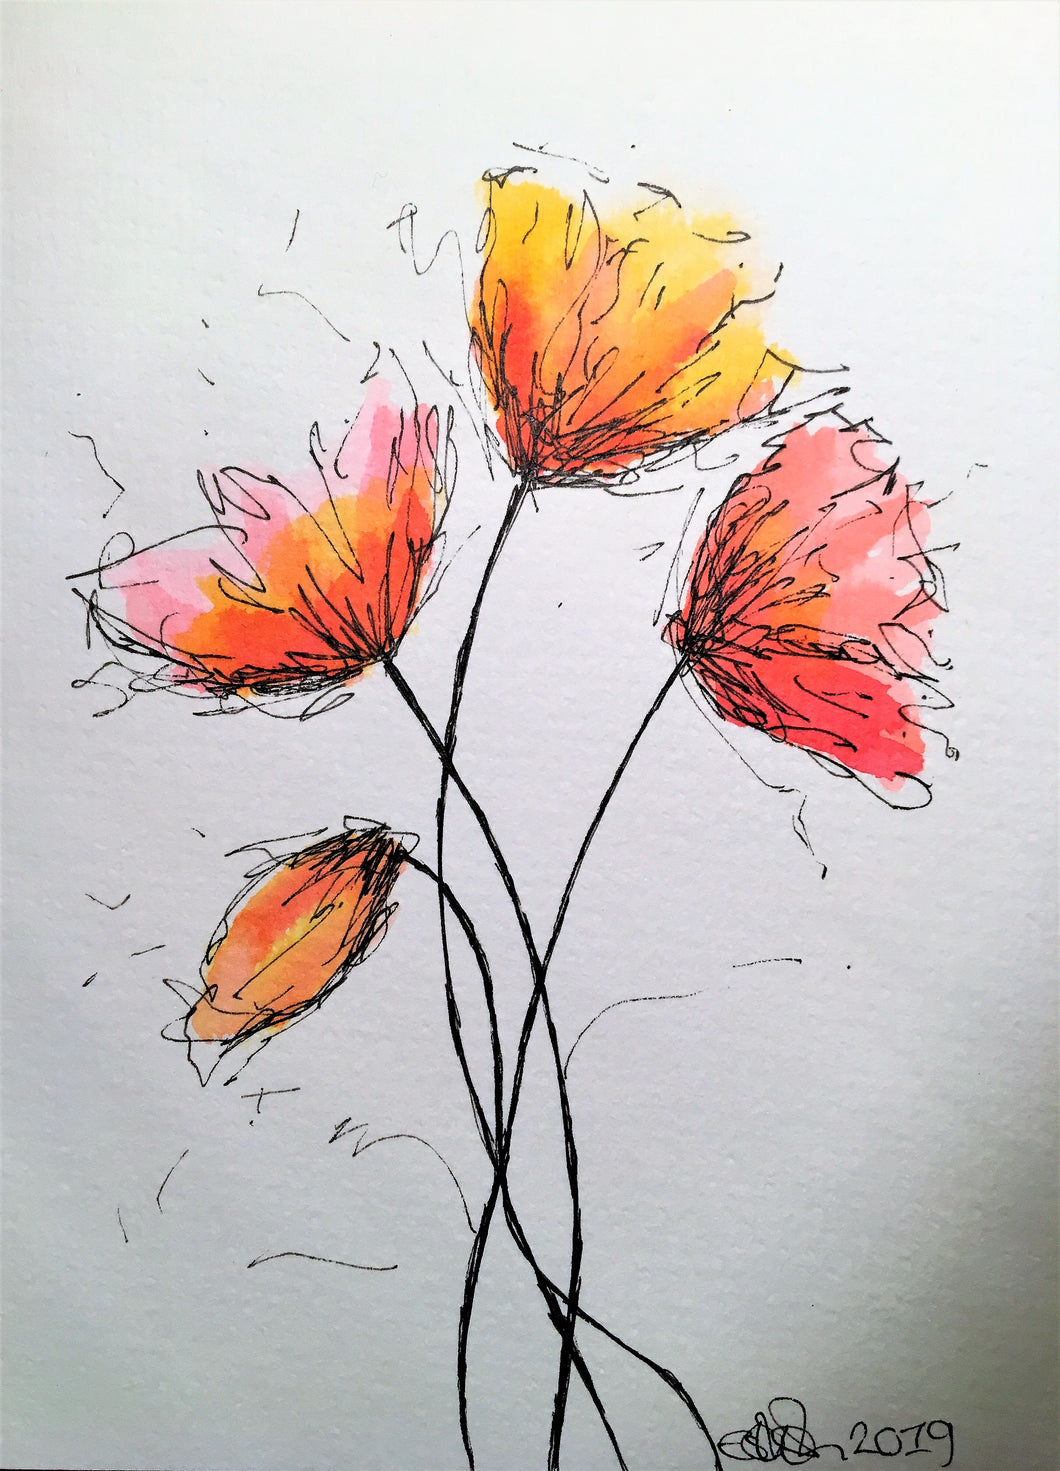 Handpainted Watercolour Greeting Card - Abstract Red/Orange Poppies Design - eDgE dEsiGn London